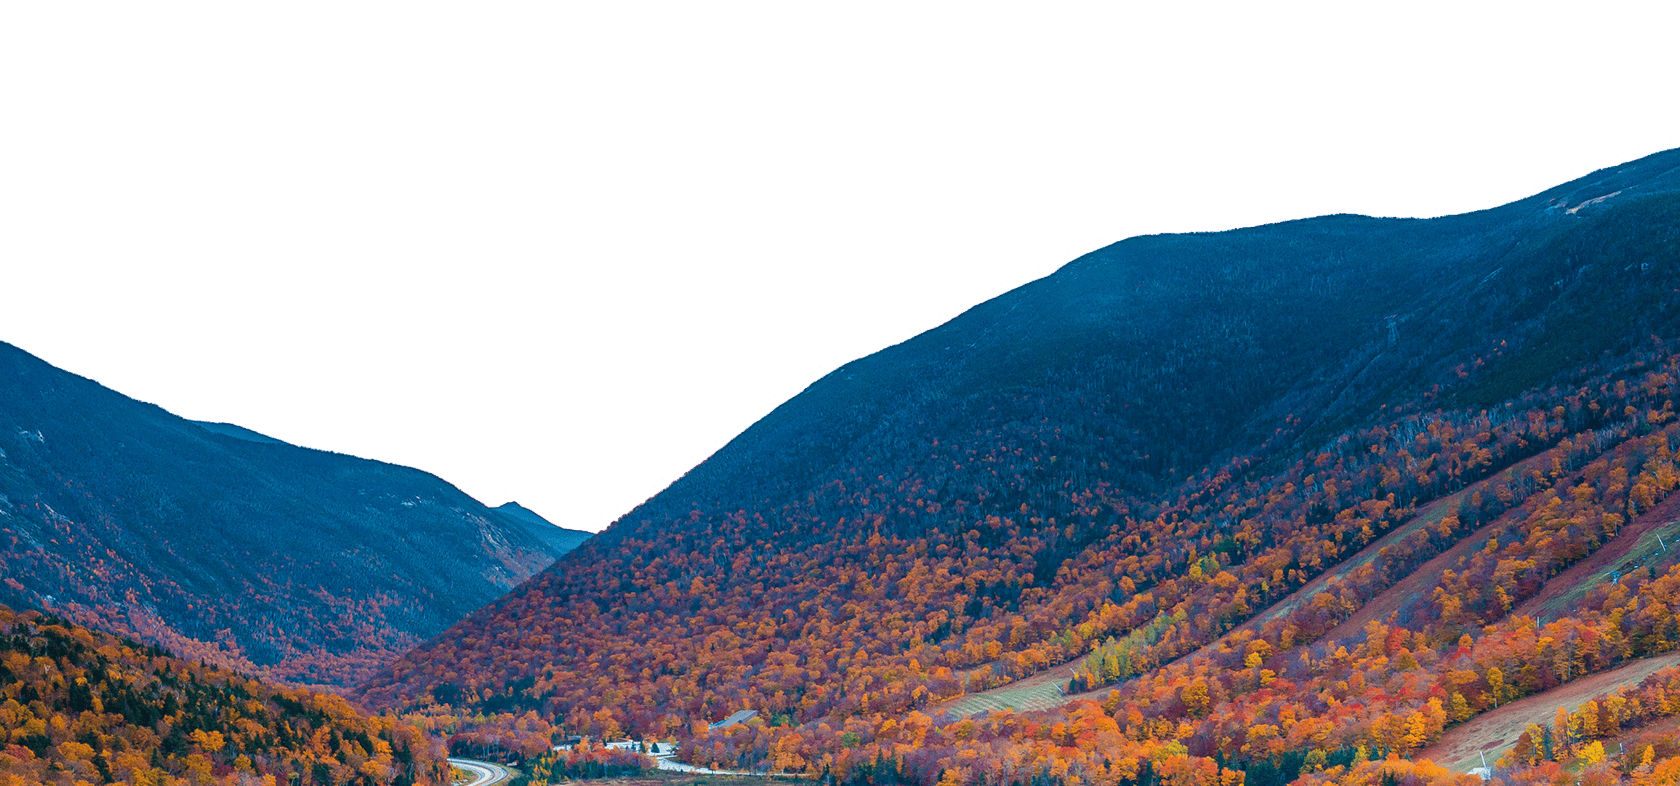 An image of a mountain with trees in the background.